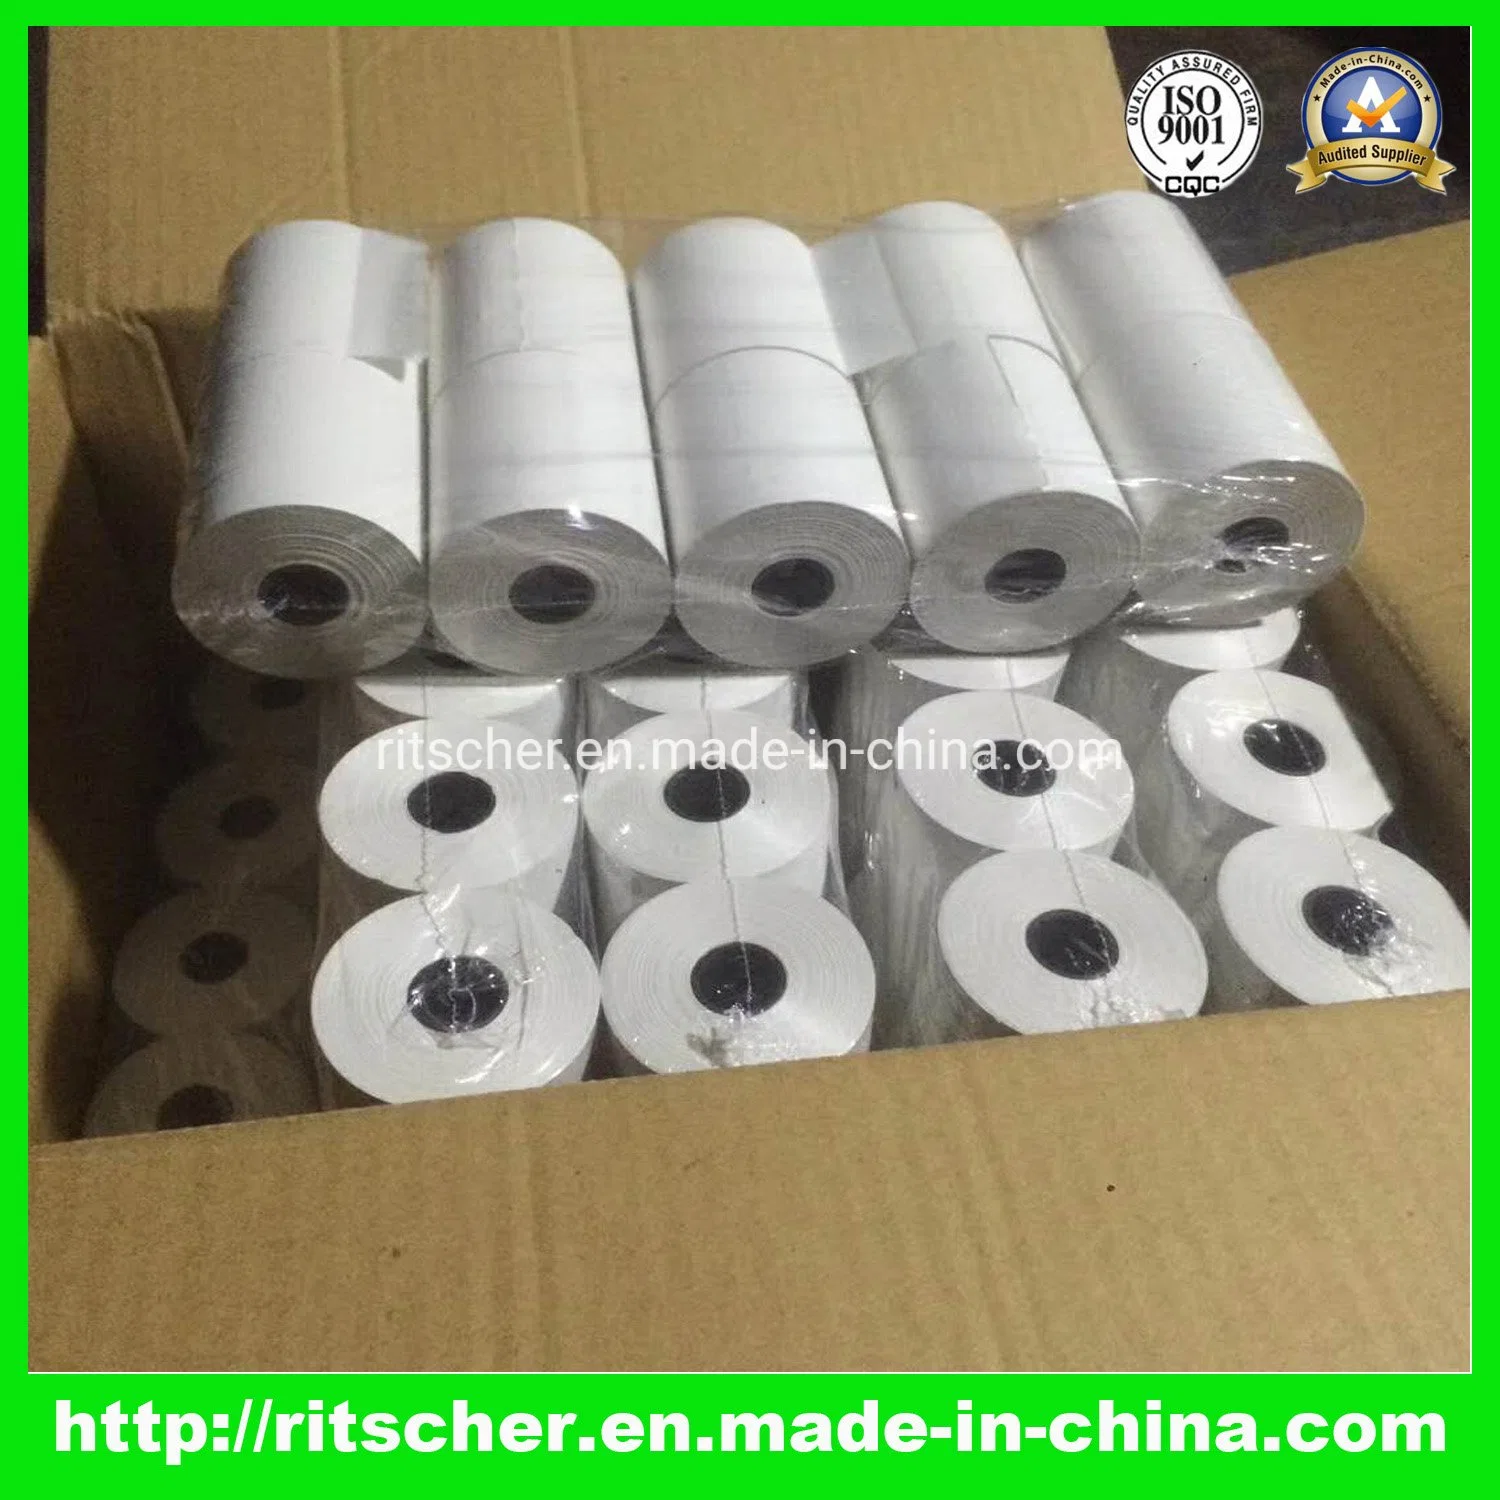 Thermal Paper Roll of Thermal Jumbo Roll/Small Paper Roll